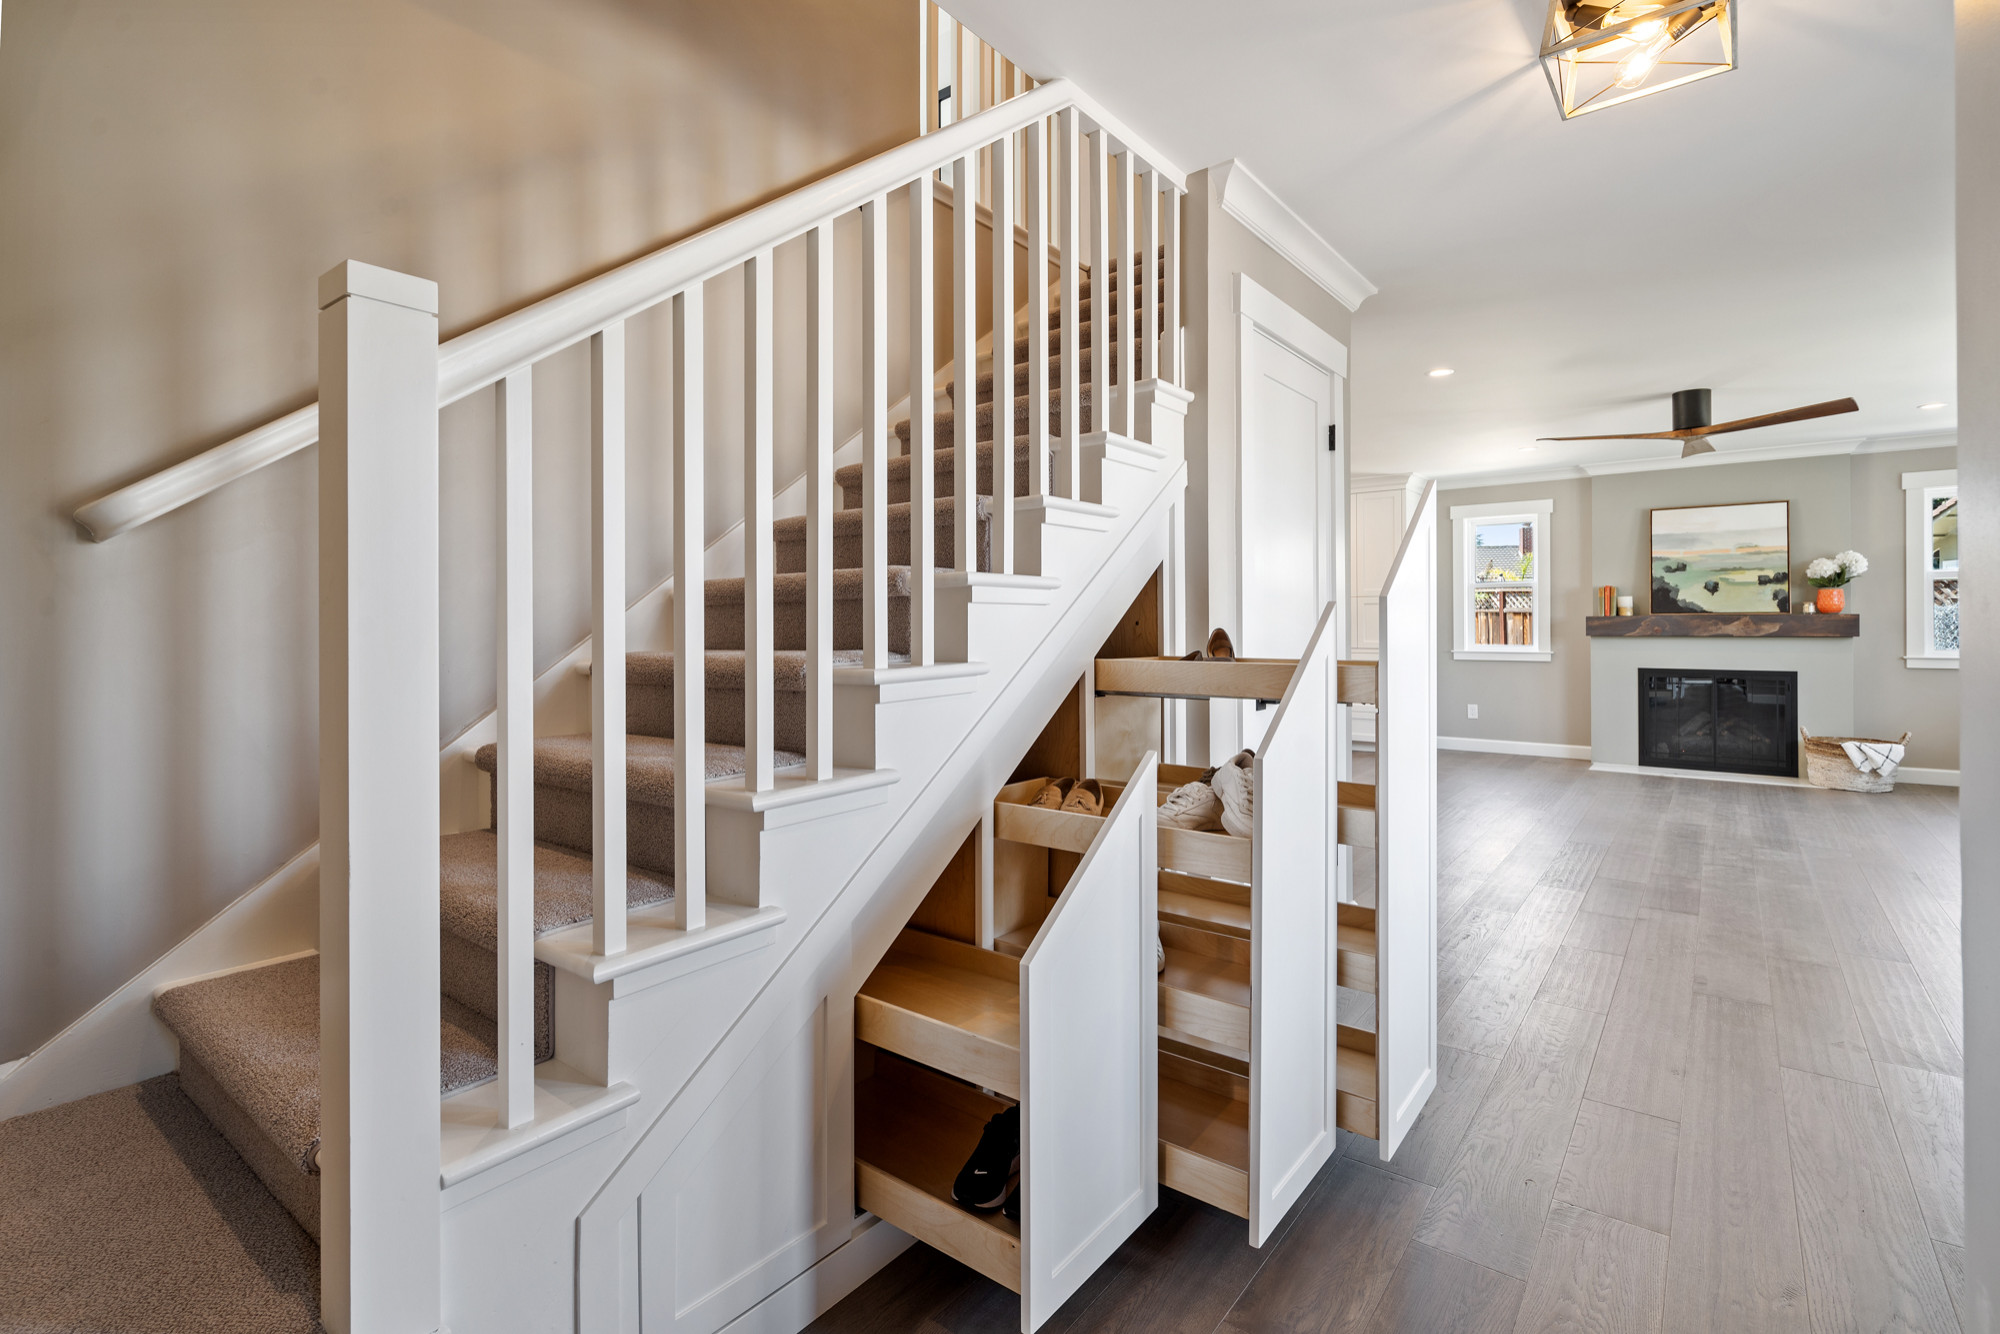 https://st.hzcdn.com/simgs/pictures/staircases/glowing-ct-full-home-renovation-and-additions-woodcliff-builders-img~d0d13d690f494209_14-5275-1-80c128b.jpg